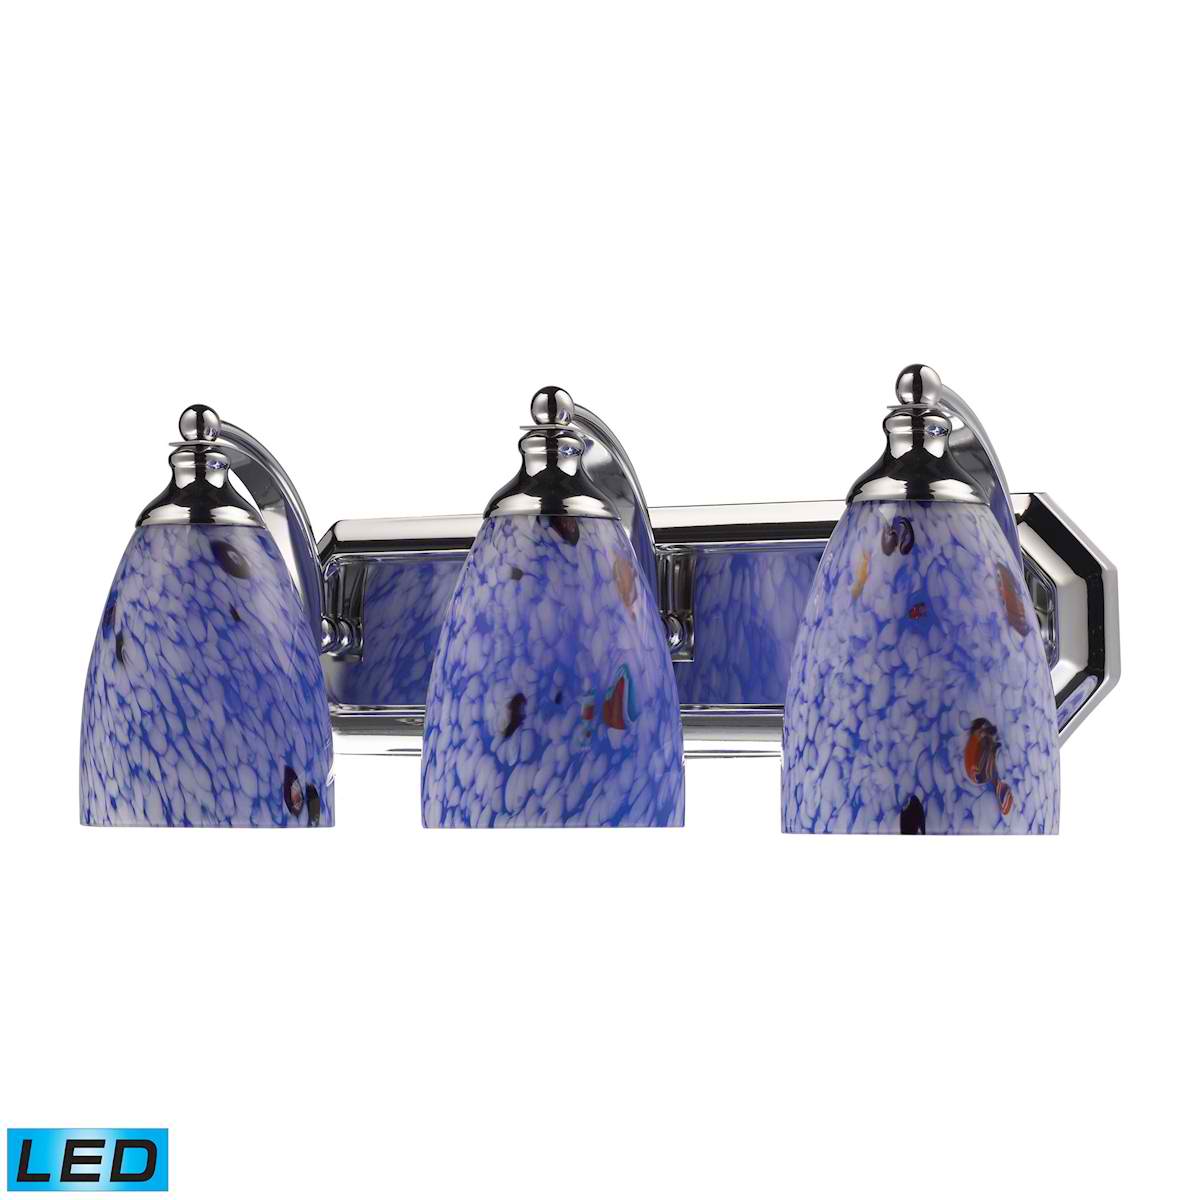 3 Light Vanity in Polished Chrome and Starburst Blue Glass - LED, 800 Lumens (2400 Lumens Total) With Full Scale